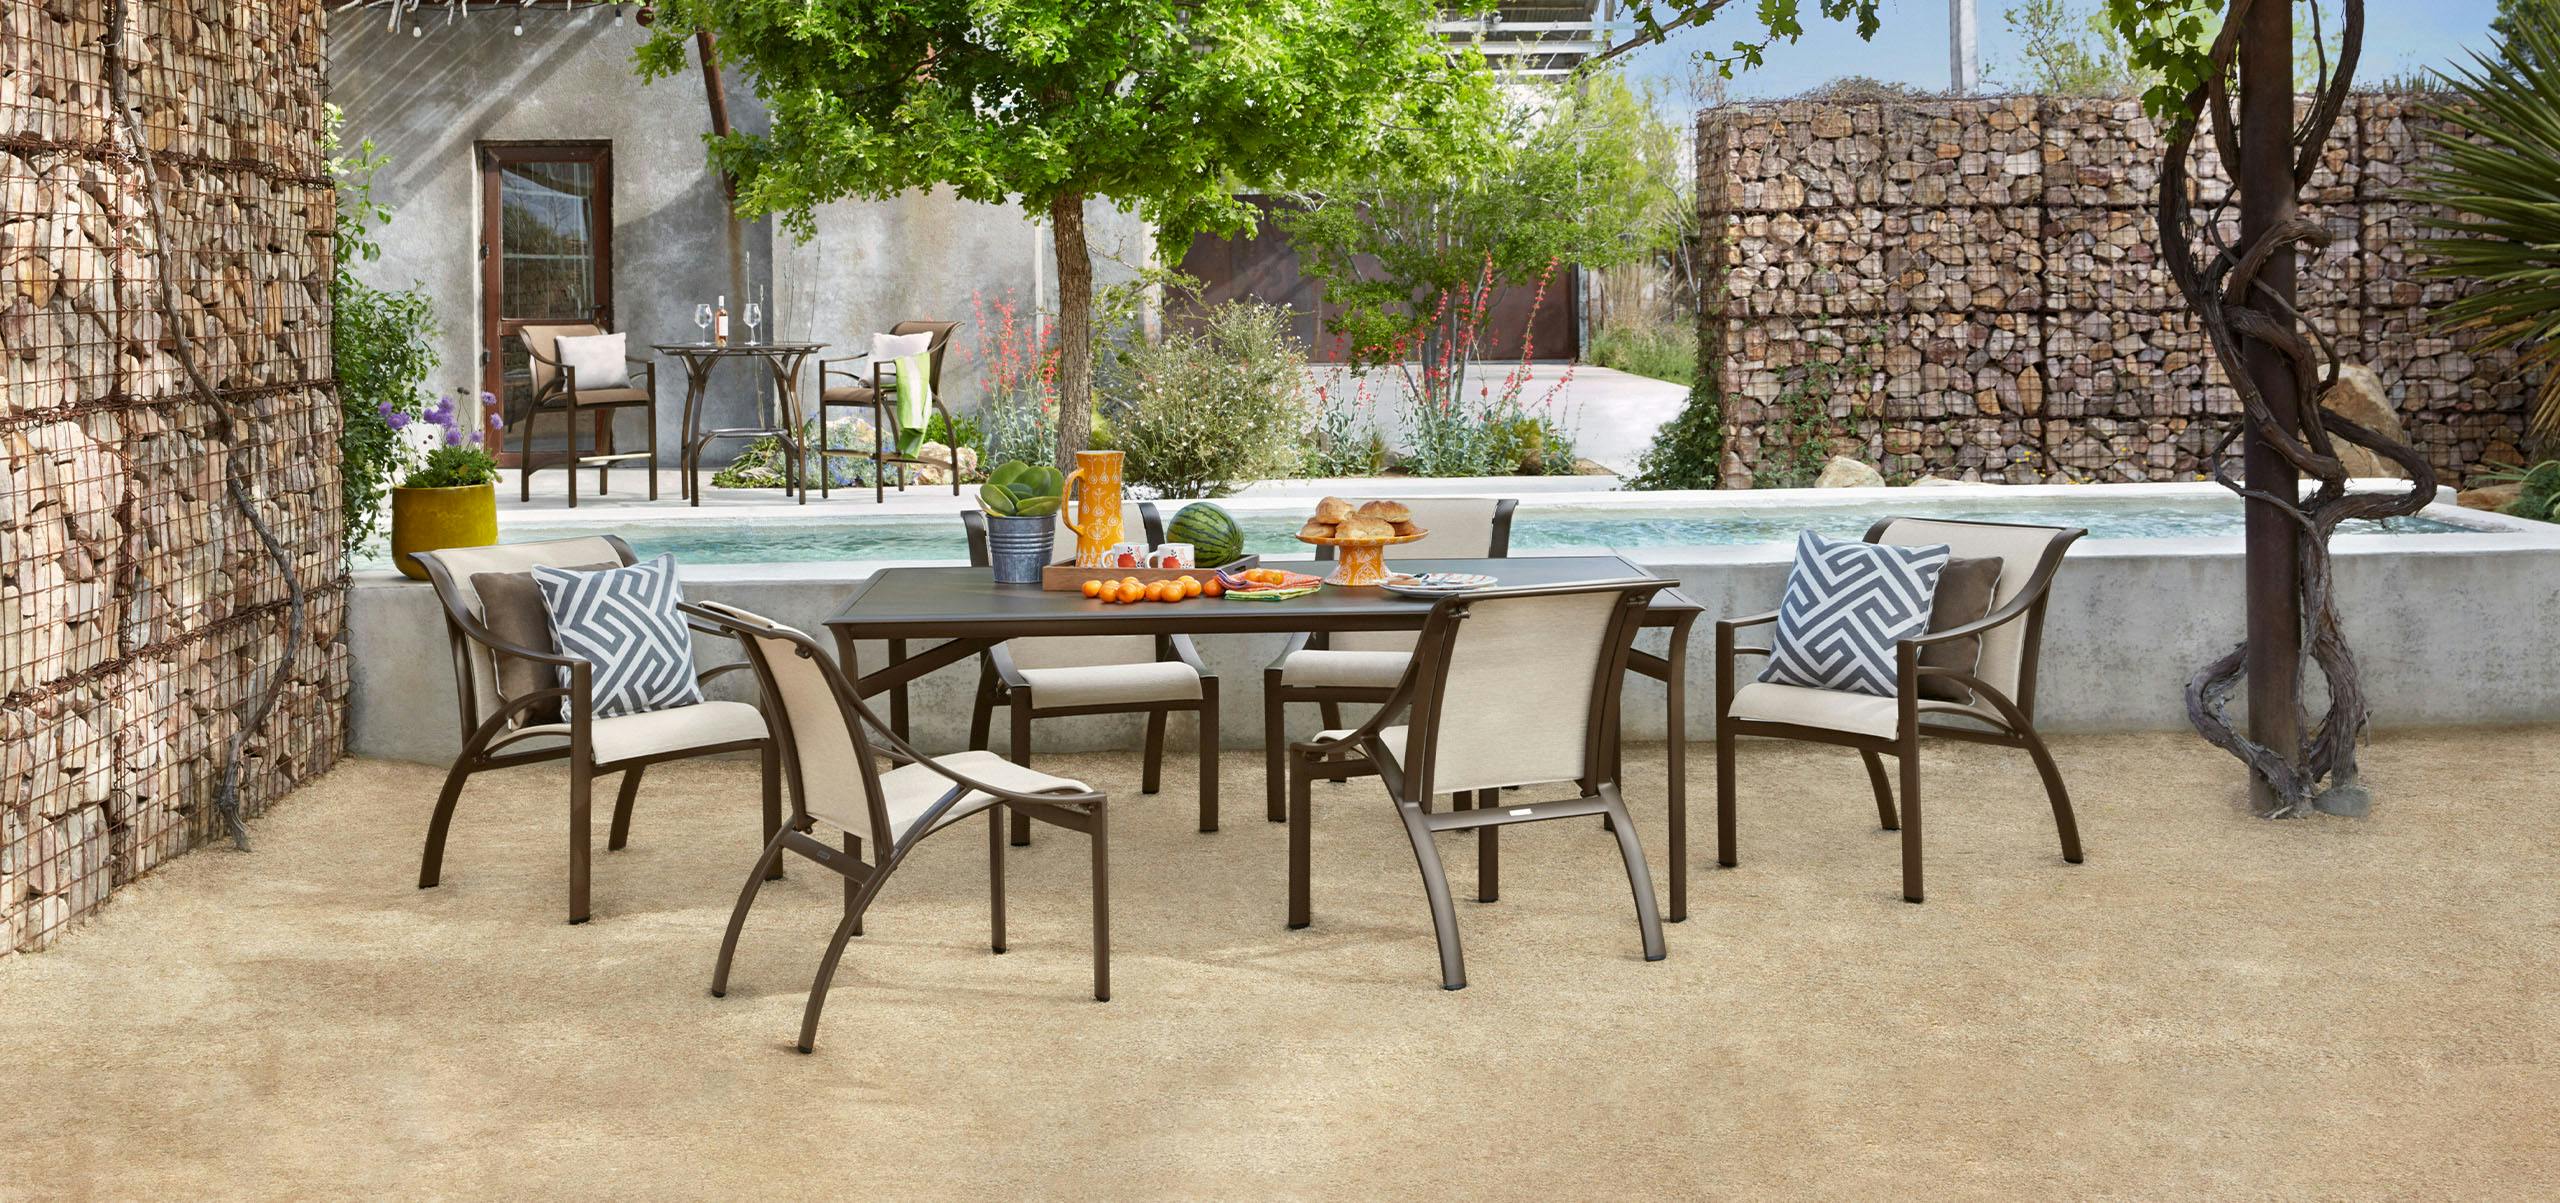 Should You Buy Low-End or High End Quality Patio Furniture? – Sunniland  Patio - Patio Furniture in Boca Raton